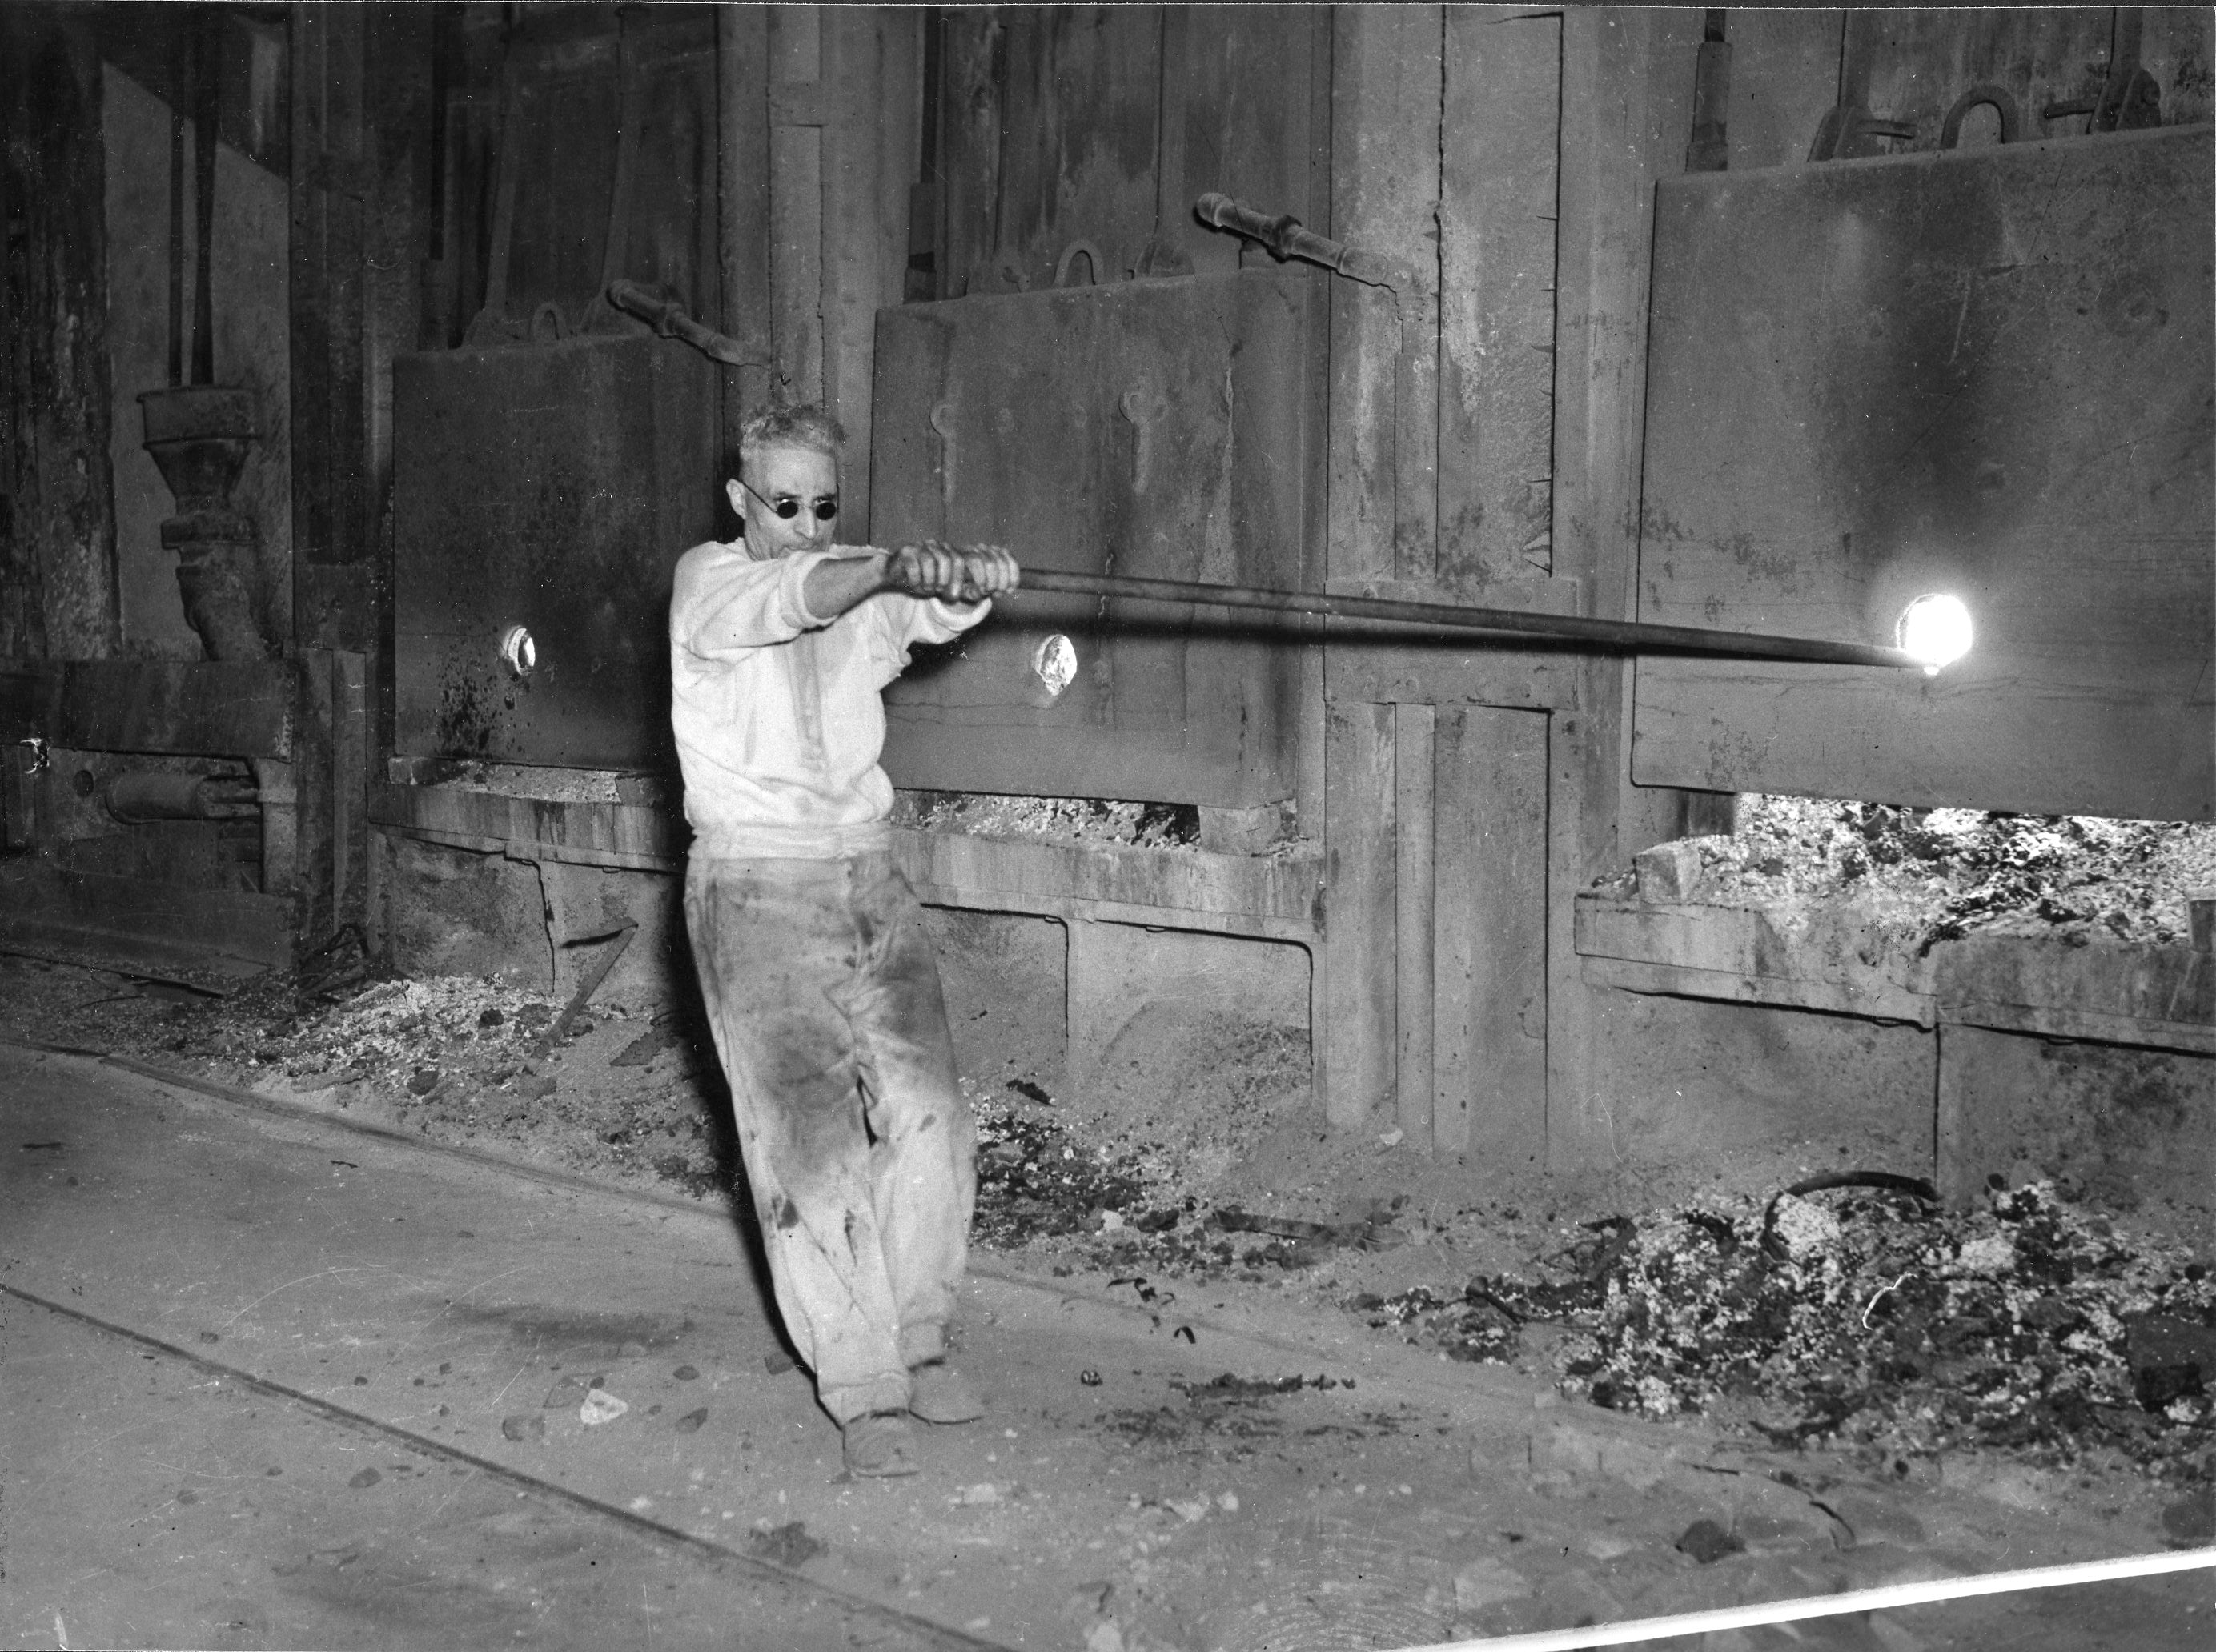 Vintage black and white photo of a Hamilton steelworker in circular fashion forward protective glasses, with rolled up shirt sleeves and very minimal protective gear, holding a long rod in an industrial furnace setting, with molten material and machinery in the background.